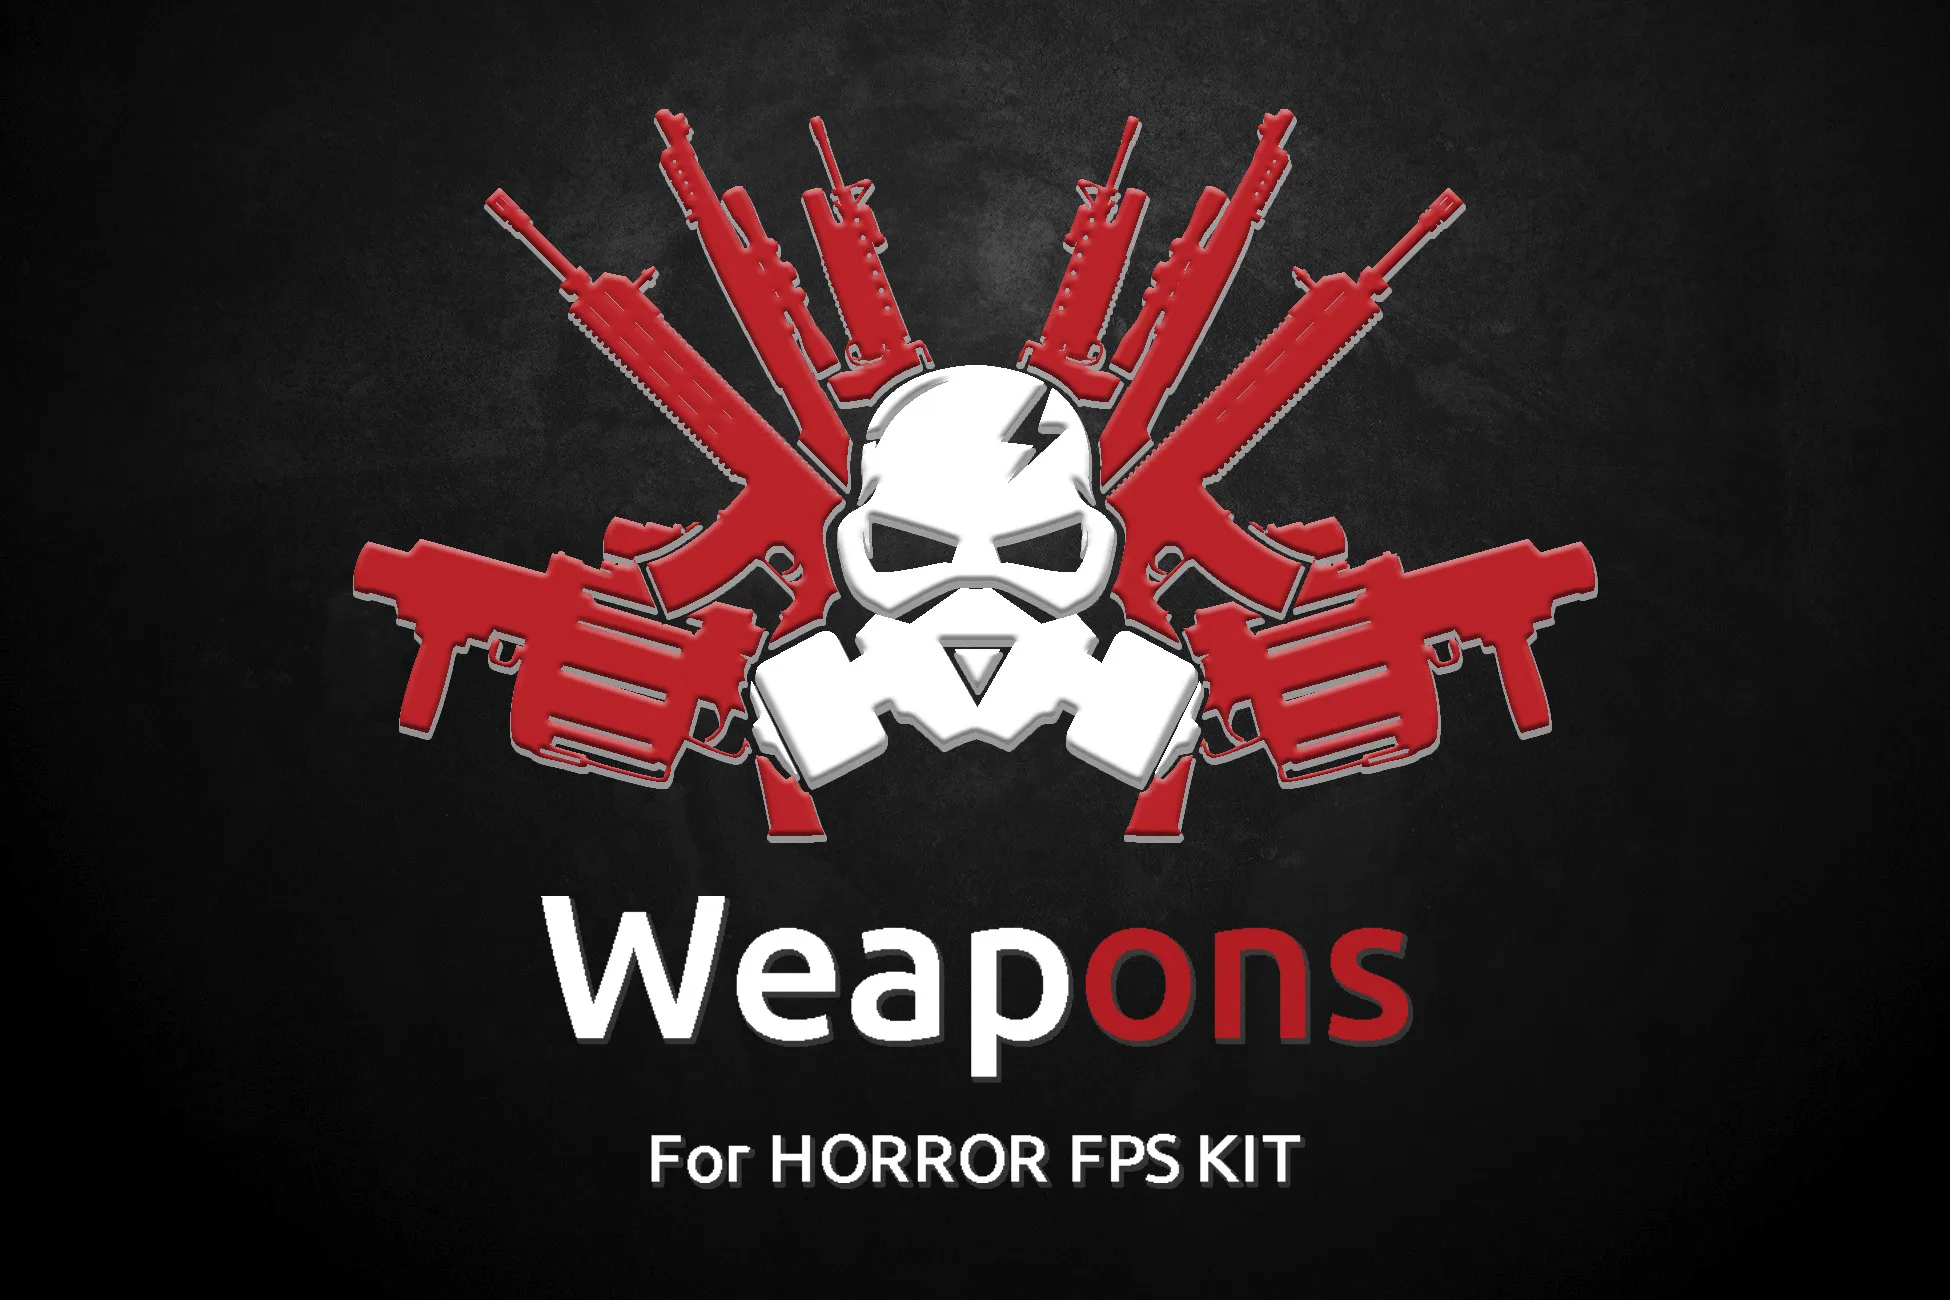 Weapons v0.1.4 Release